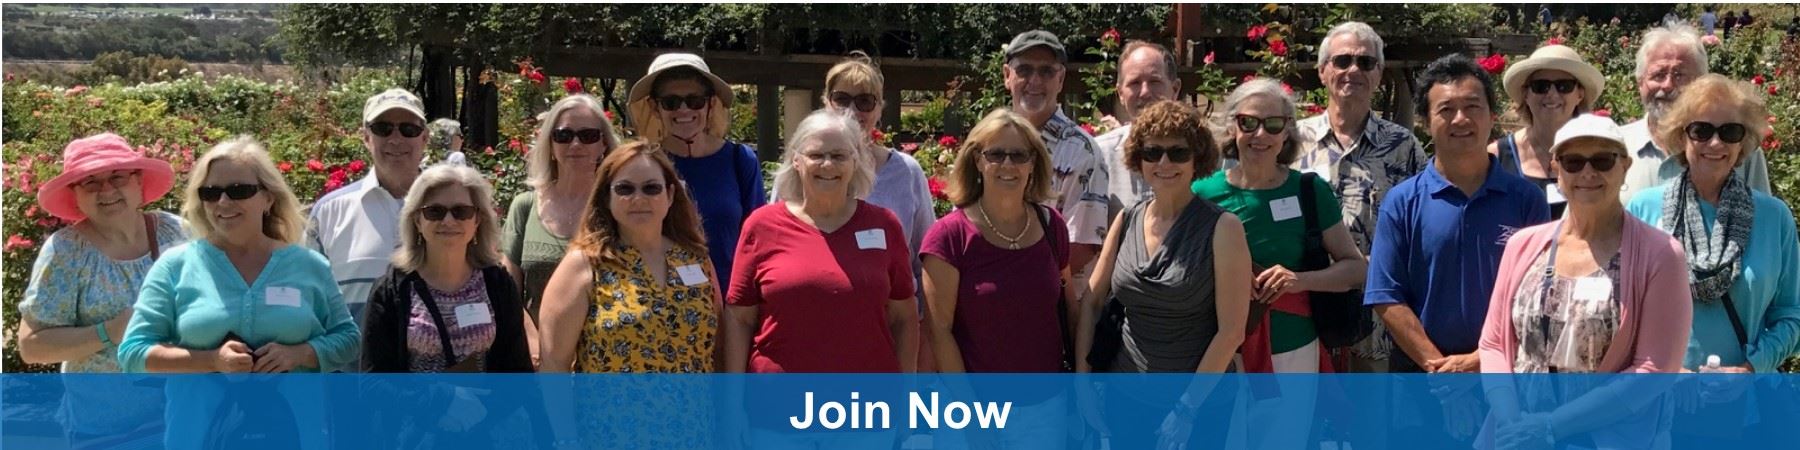 Join Now - Group of CSU San Marcos Retirees